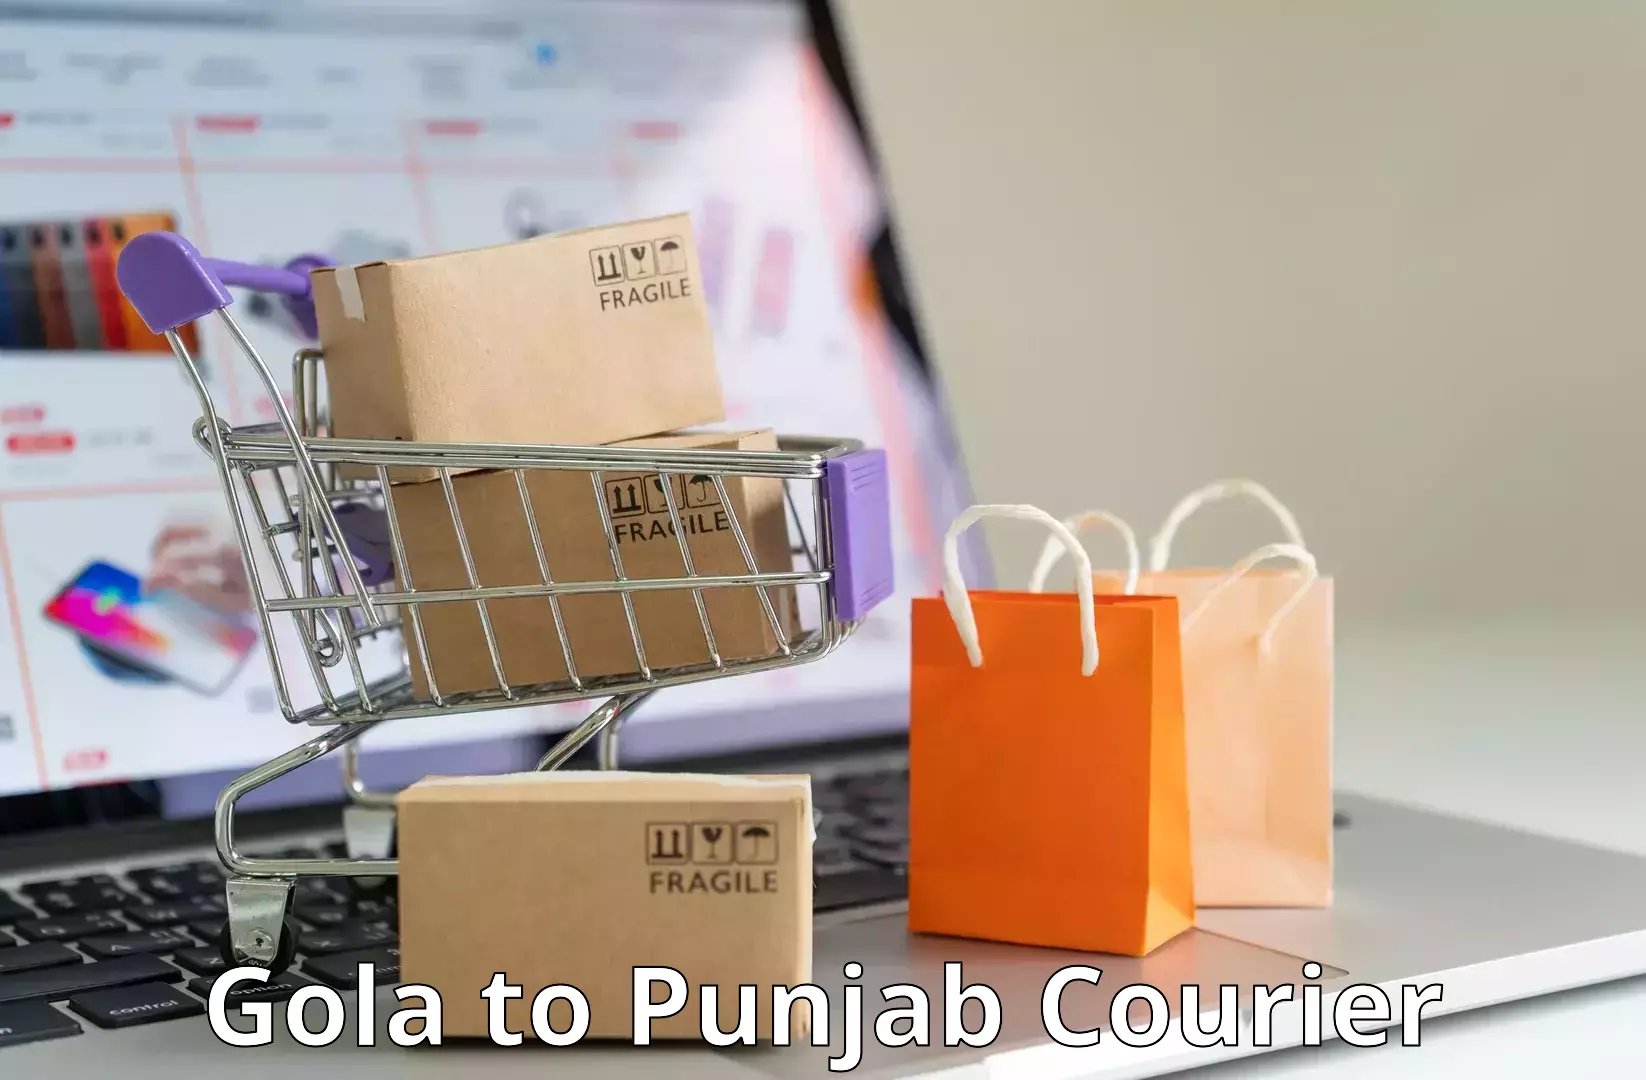 Efficient shipping operations Gola to Punjab